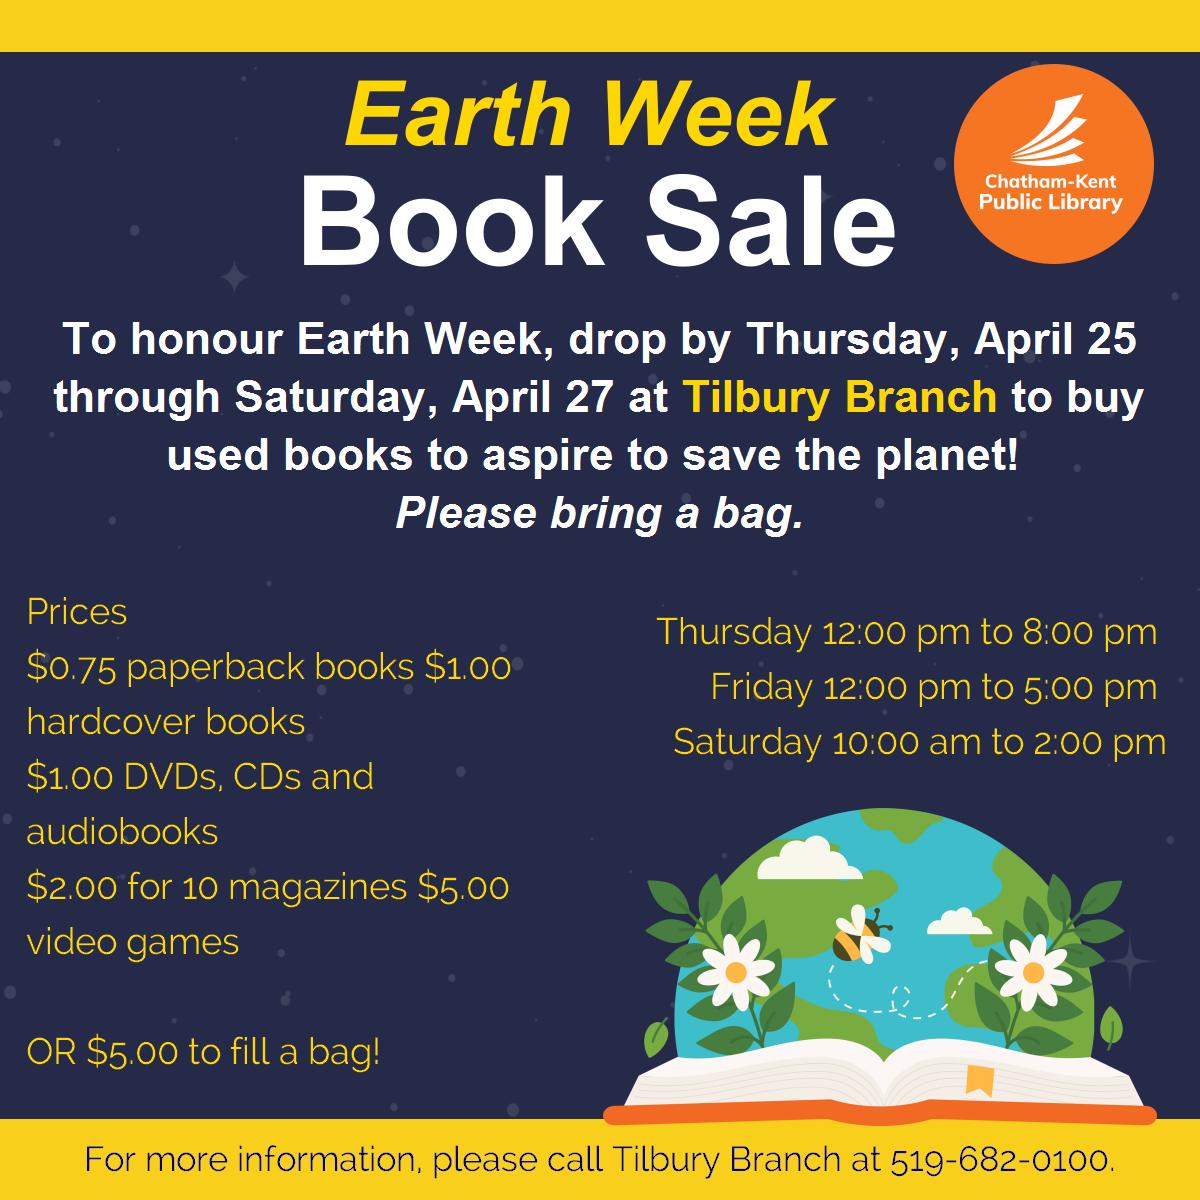 Ready to refresh your book collection while helping the planet? Join the Chatham-Kent Public Library for their Earth Week Book Sale at Tilbury Branch from April 25 to April 27. For more info, please call Tilbury Branch at 519-628-0100 #YourTVCK #TrulyLocal #CKont #CKPL #BookSale